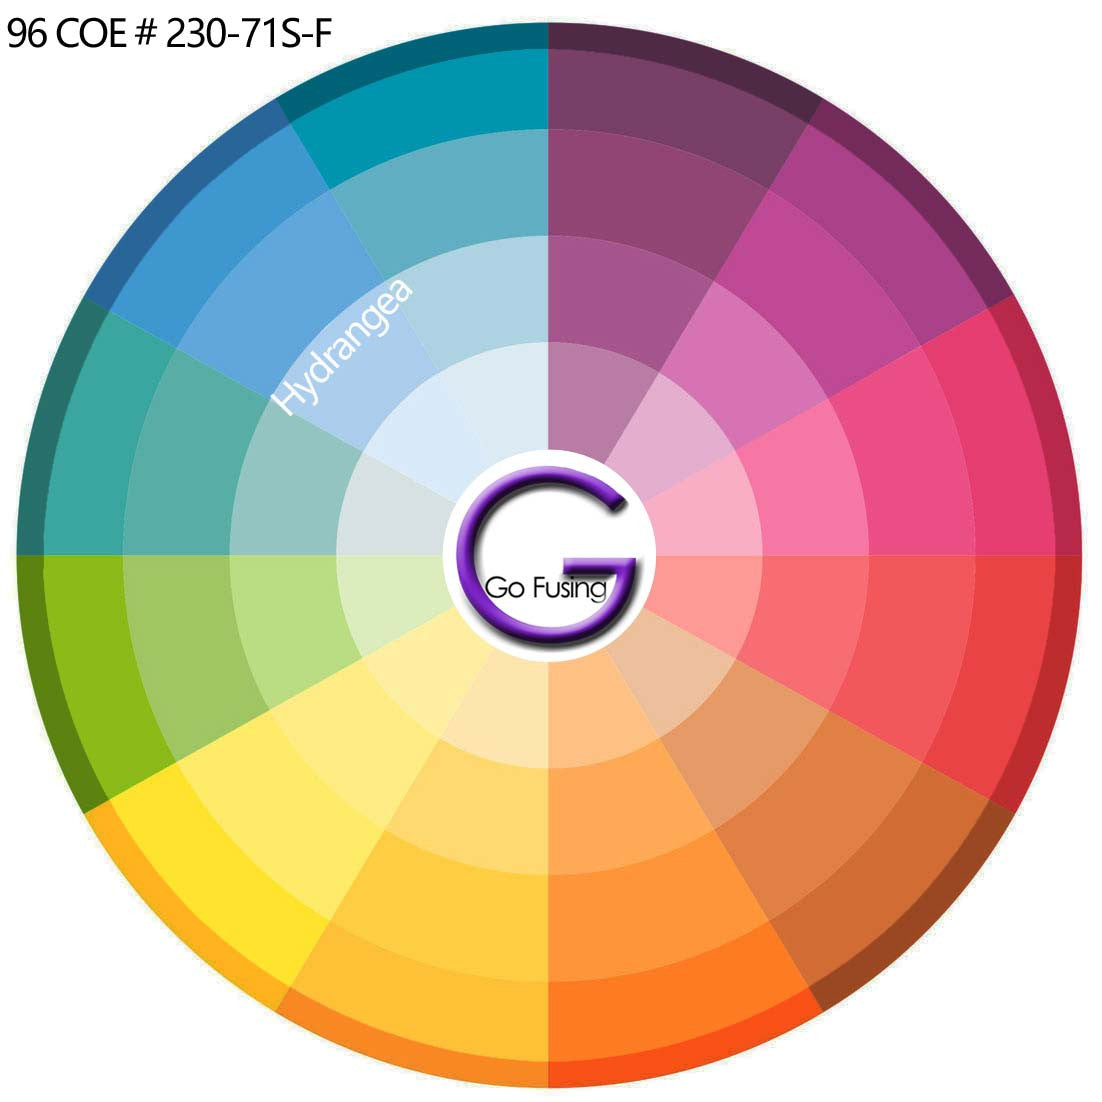 96 COE fusible Hydrangea Opal Sheet Glass on a Color Wheel to display Complimentary and Contrasting colors, 230-71S-F